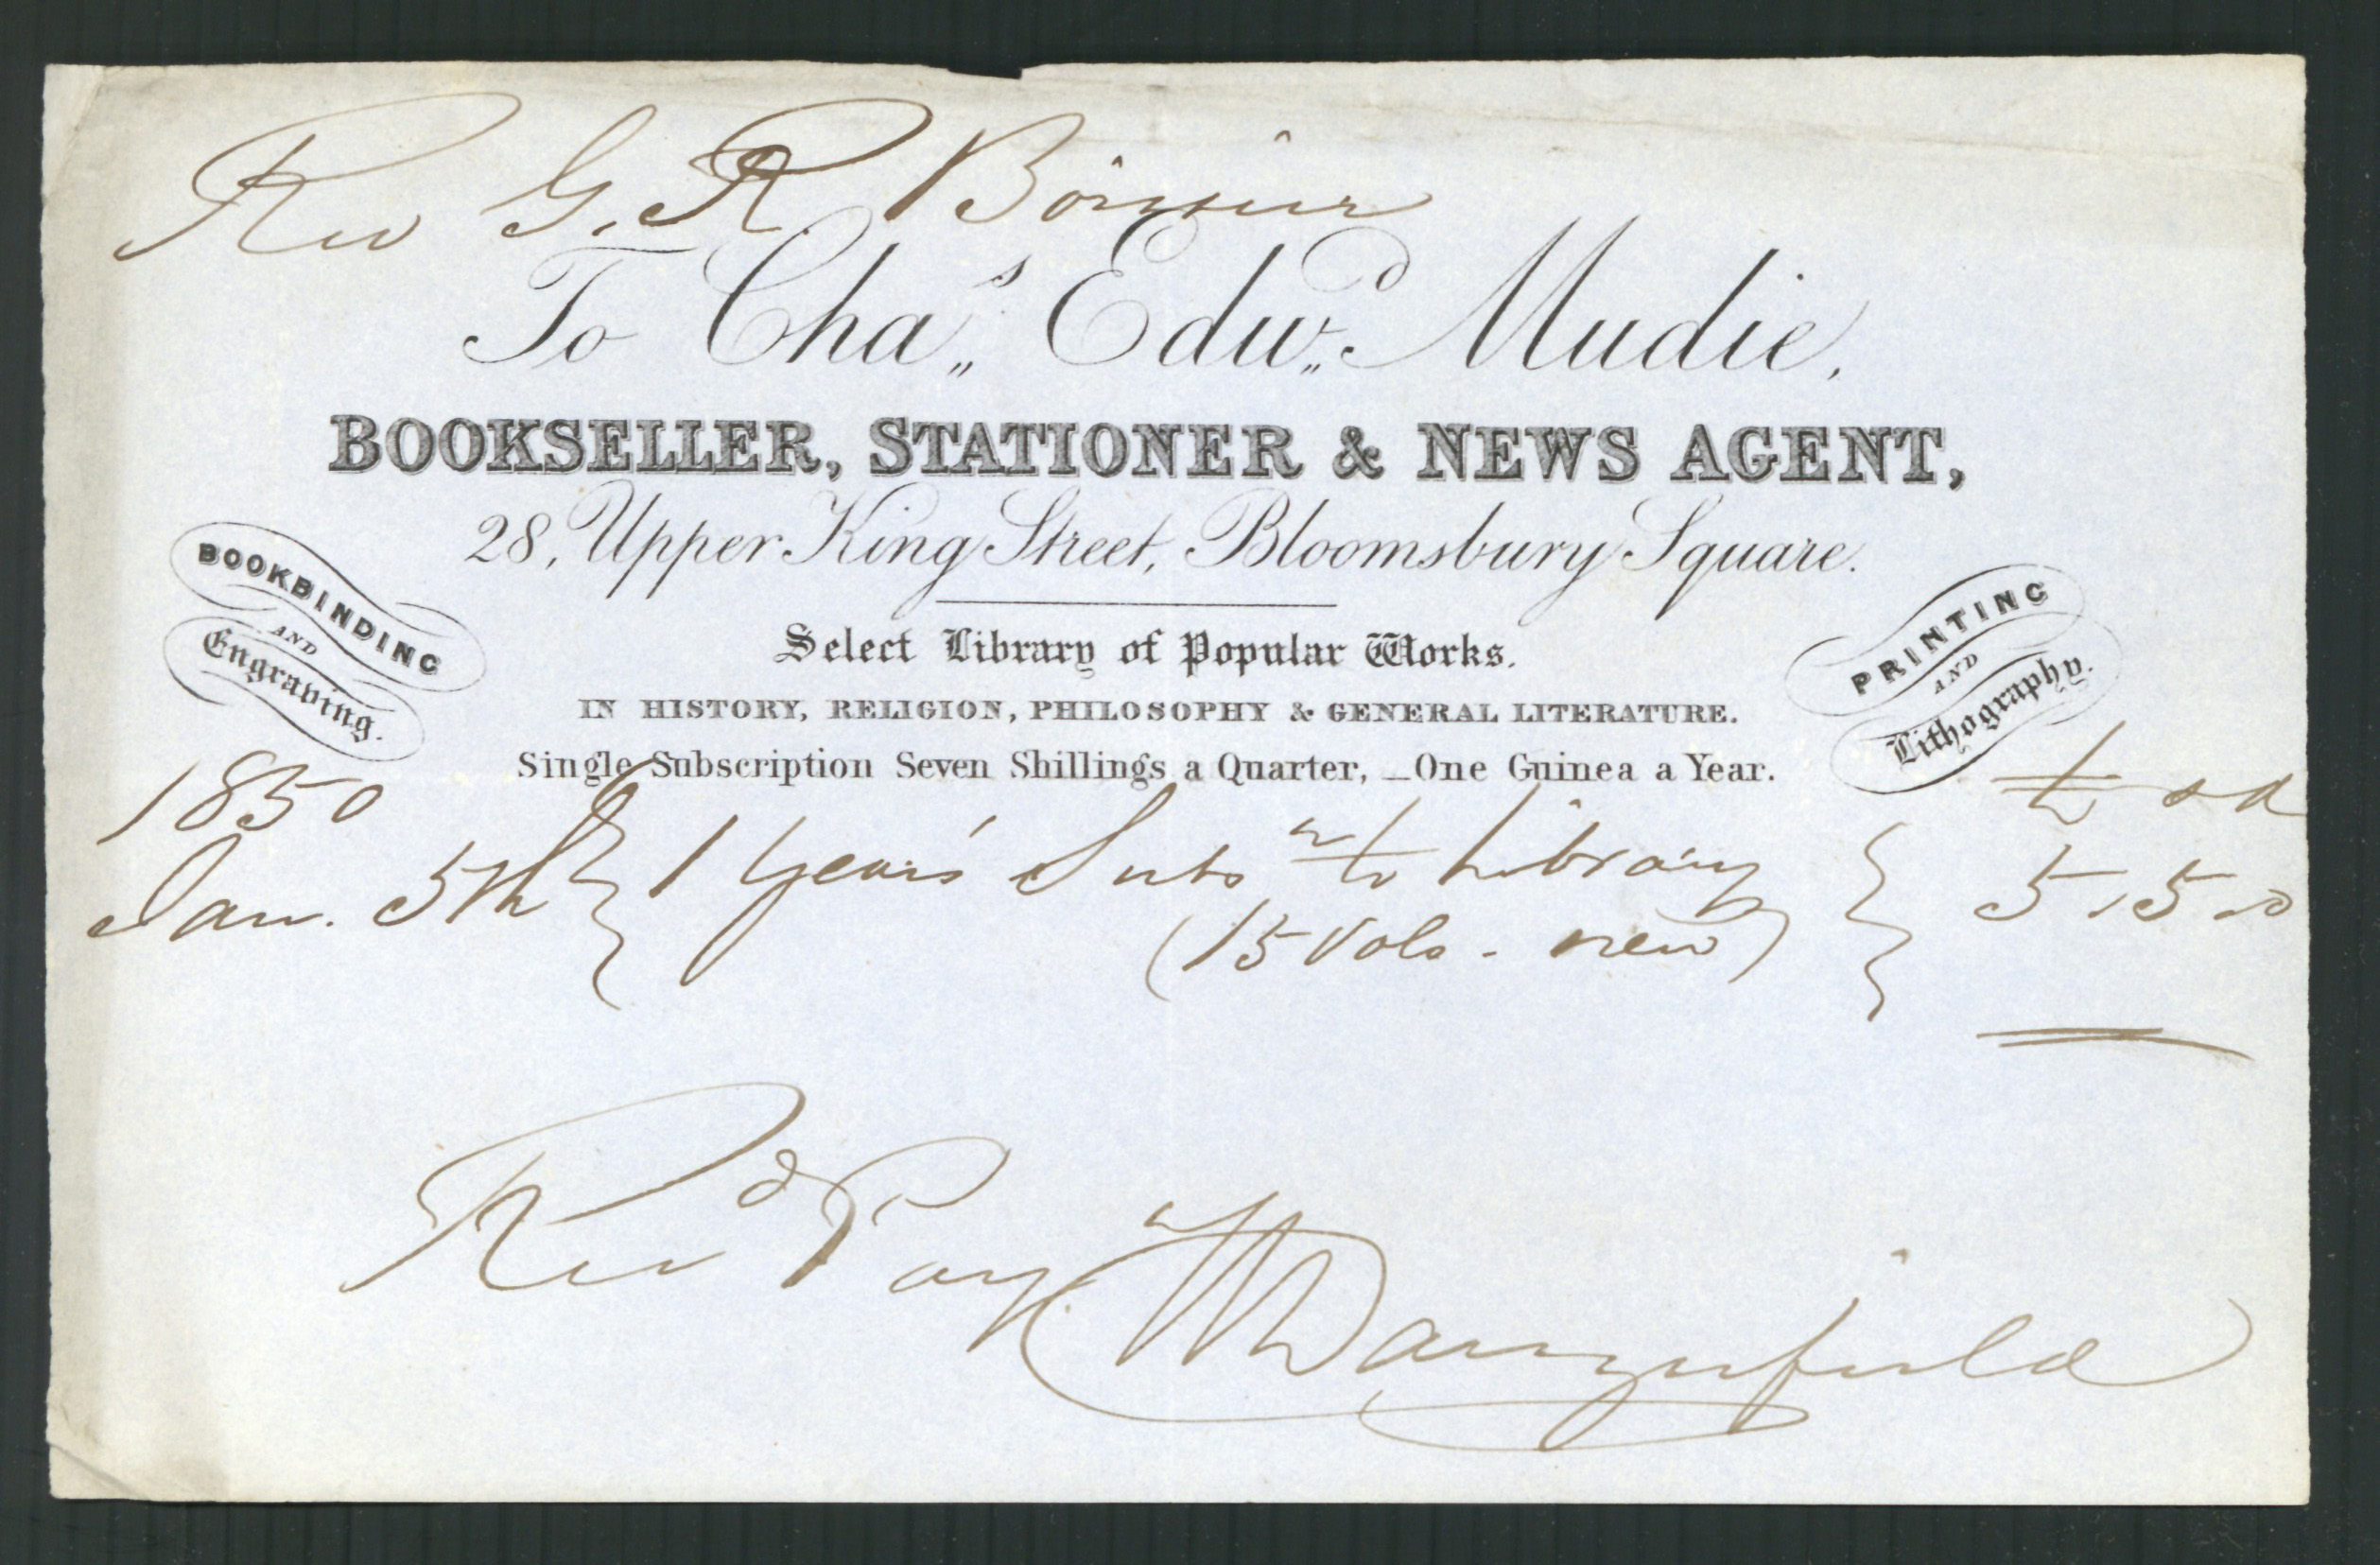 A Charles Edward Mudie invoice for a deluxe annual subscription to the rental library. 